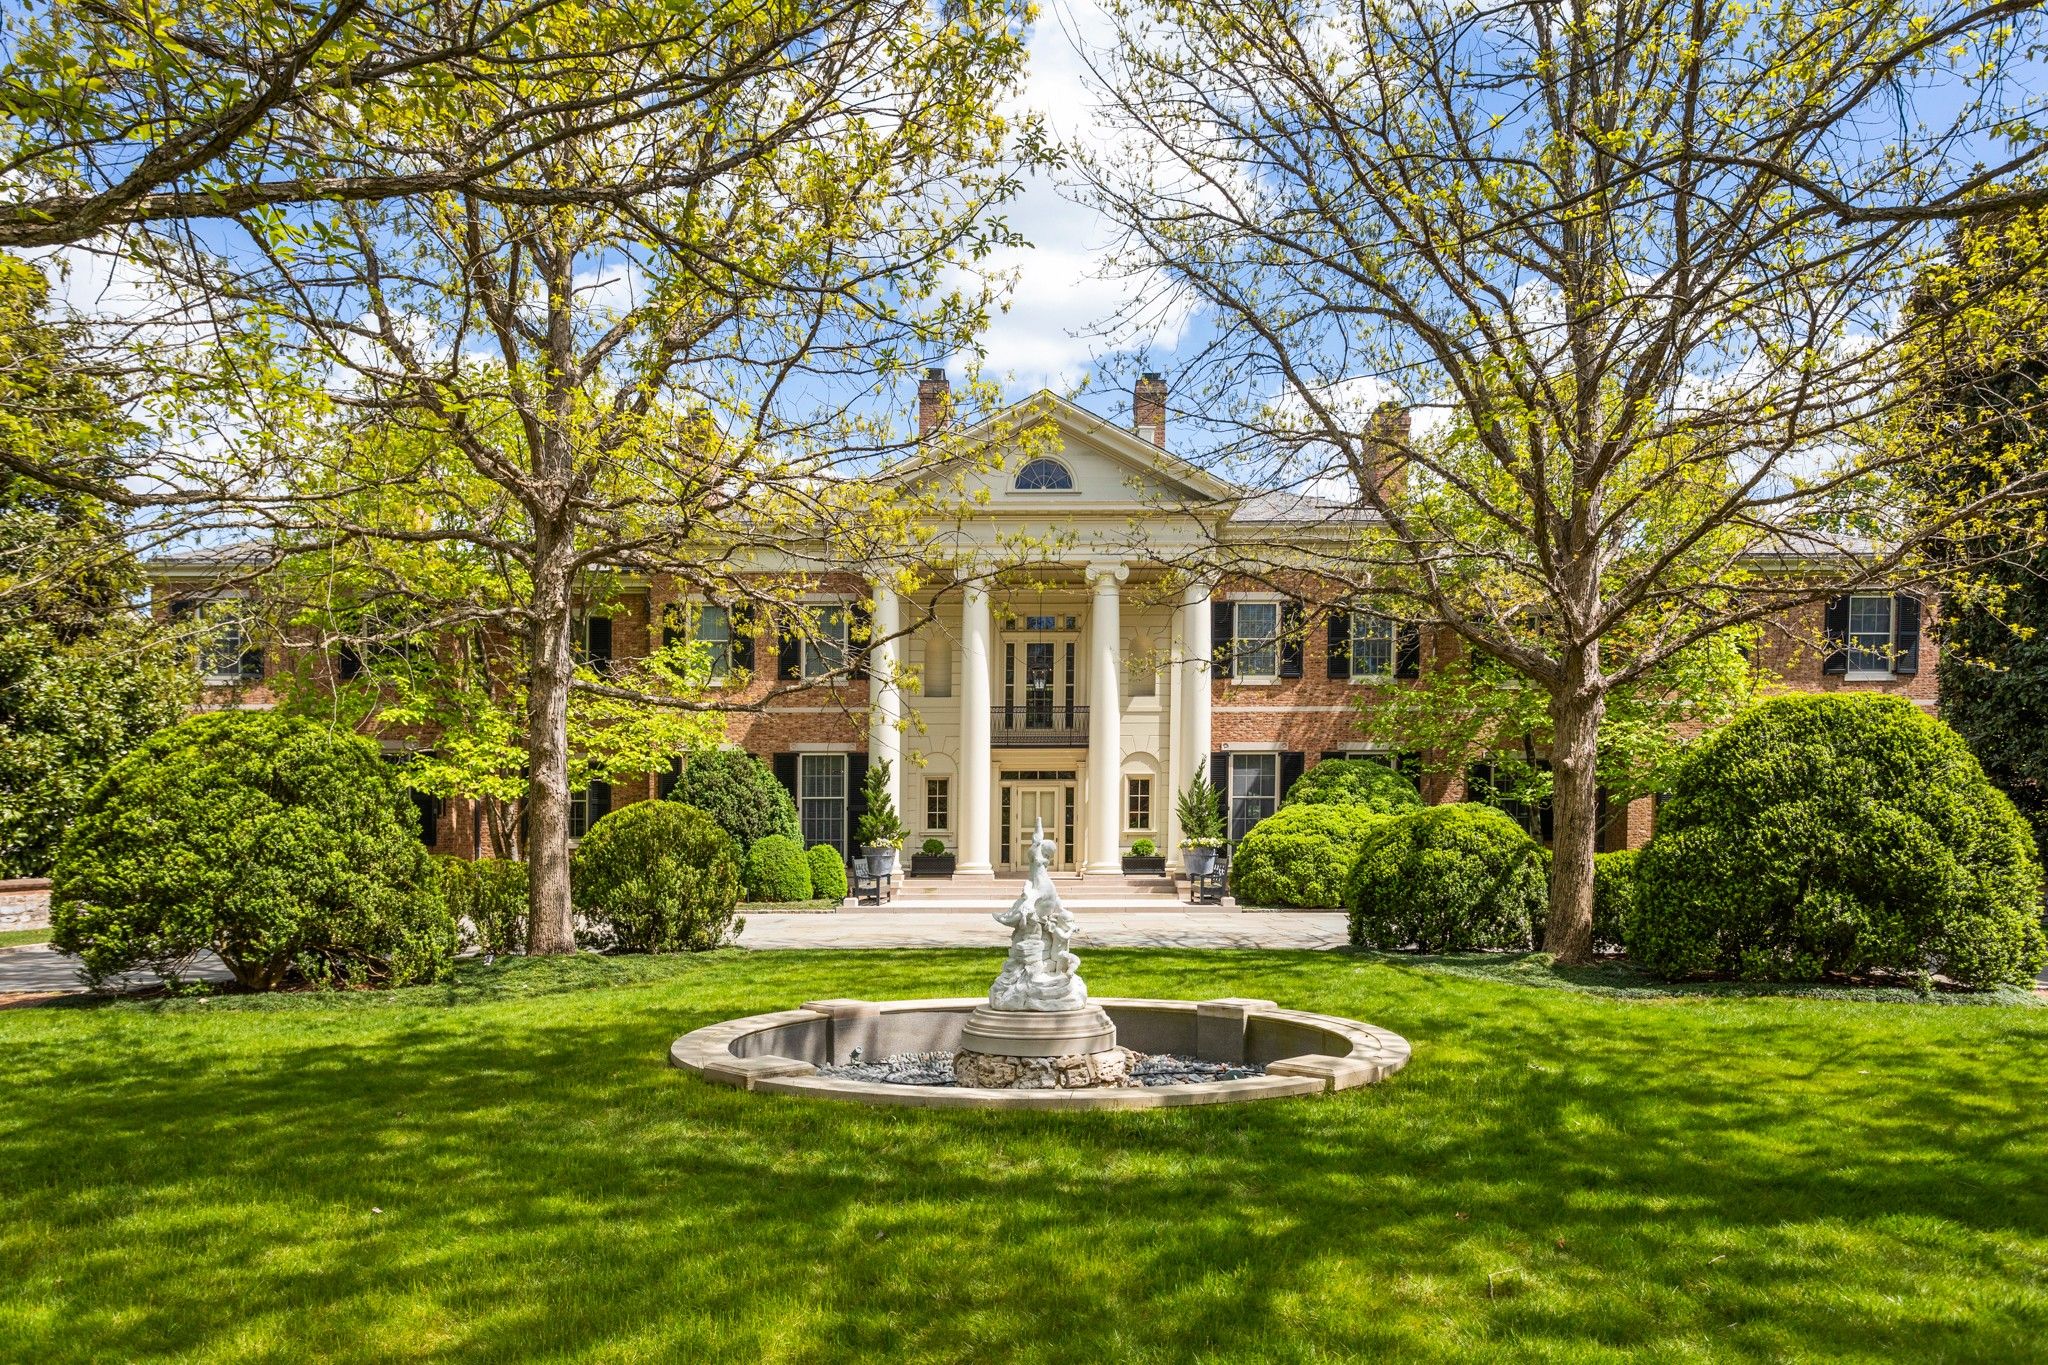  Nashville's most expensive home, listed at $50M